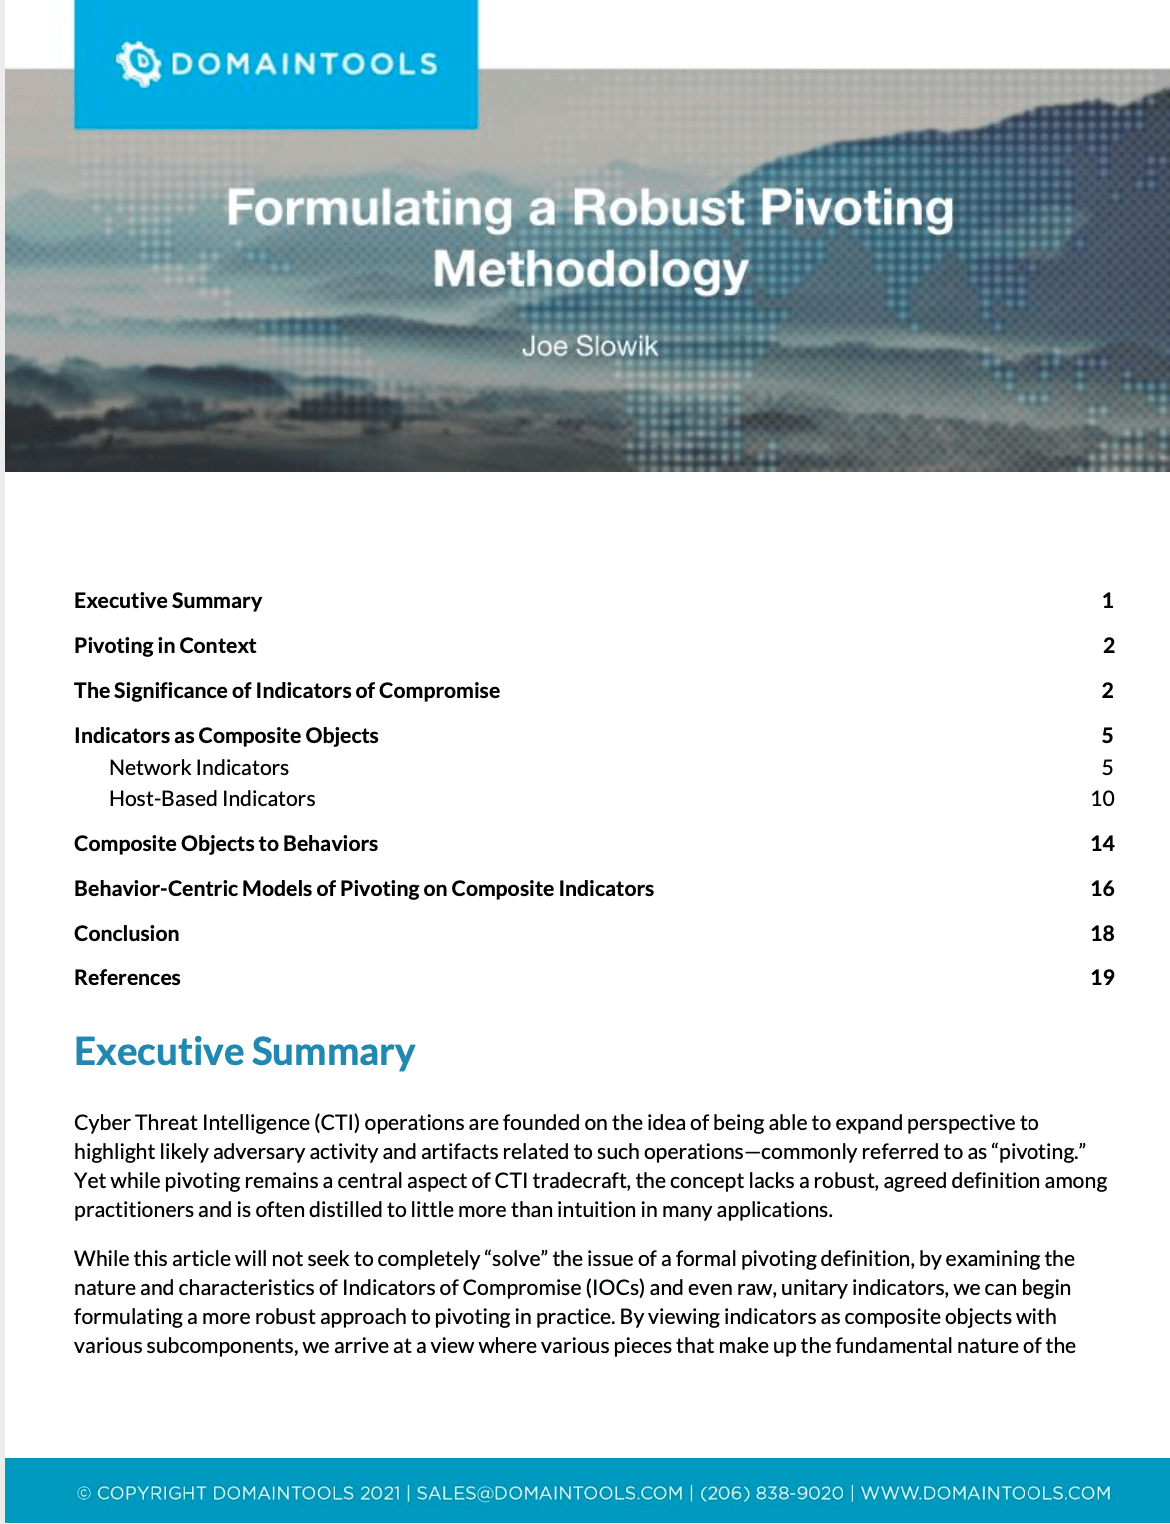 Formulating a robust pivoting methodology preview